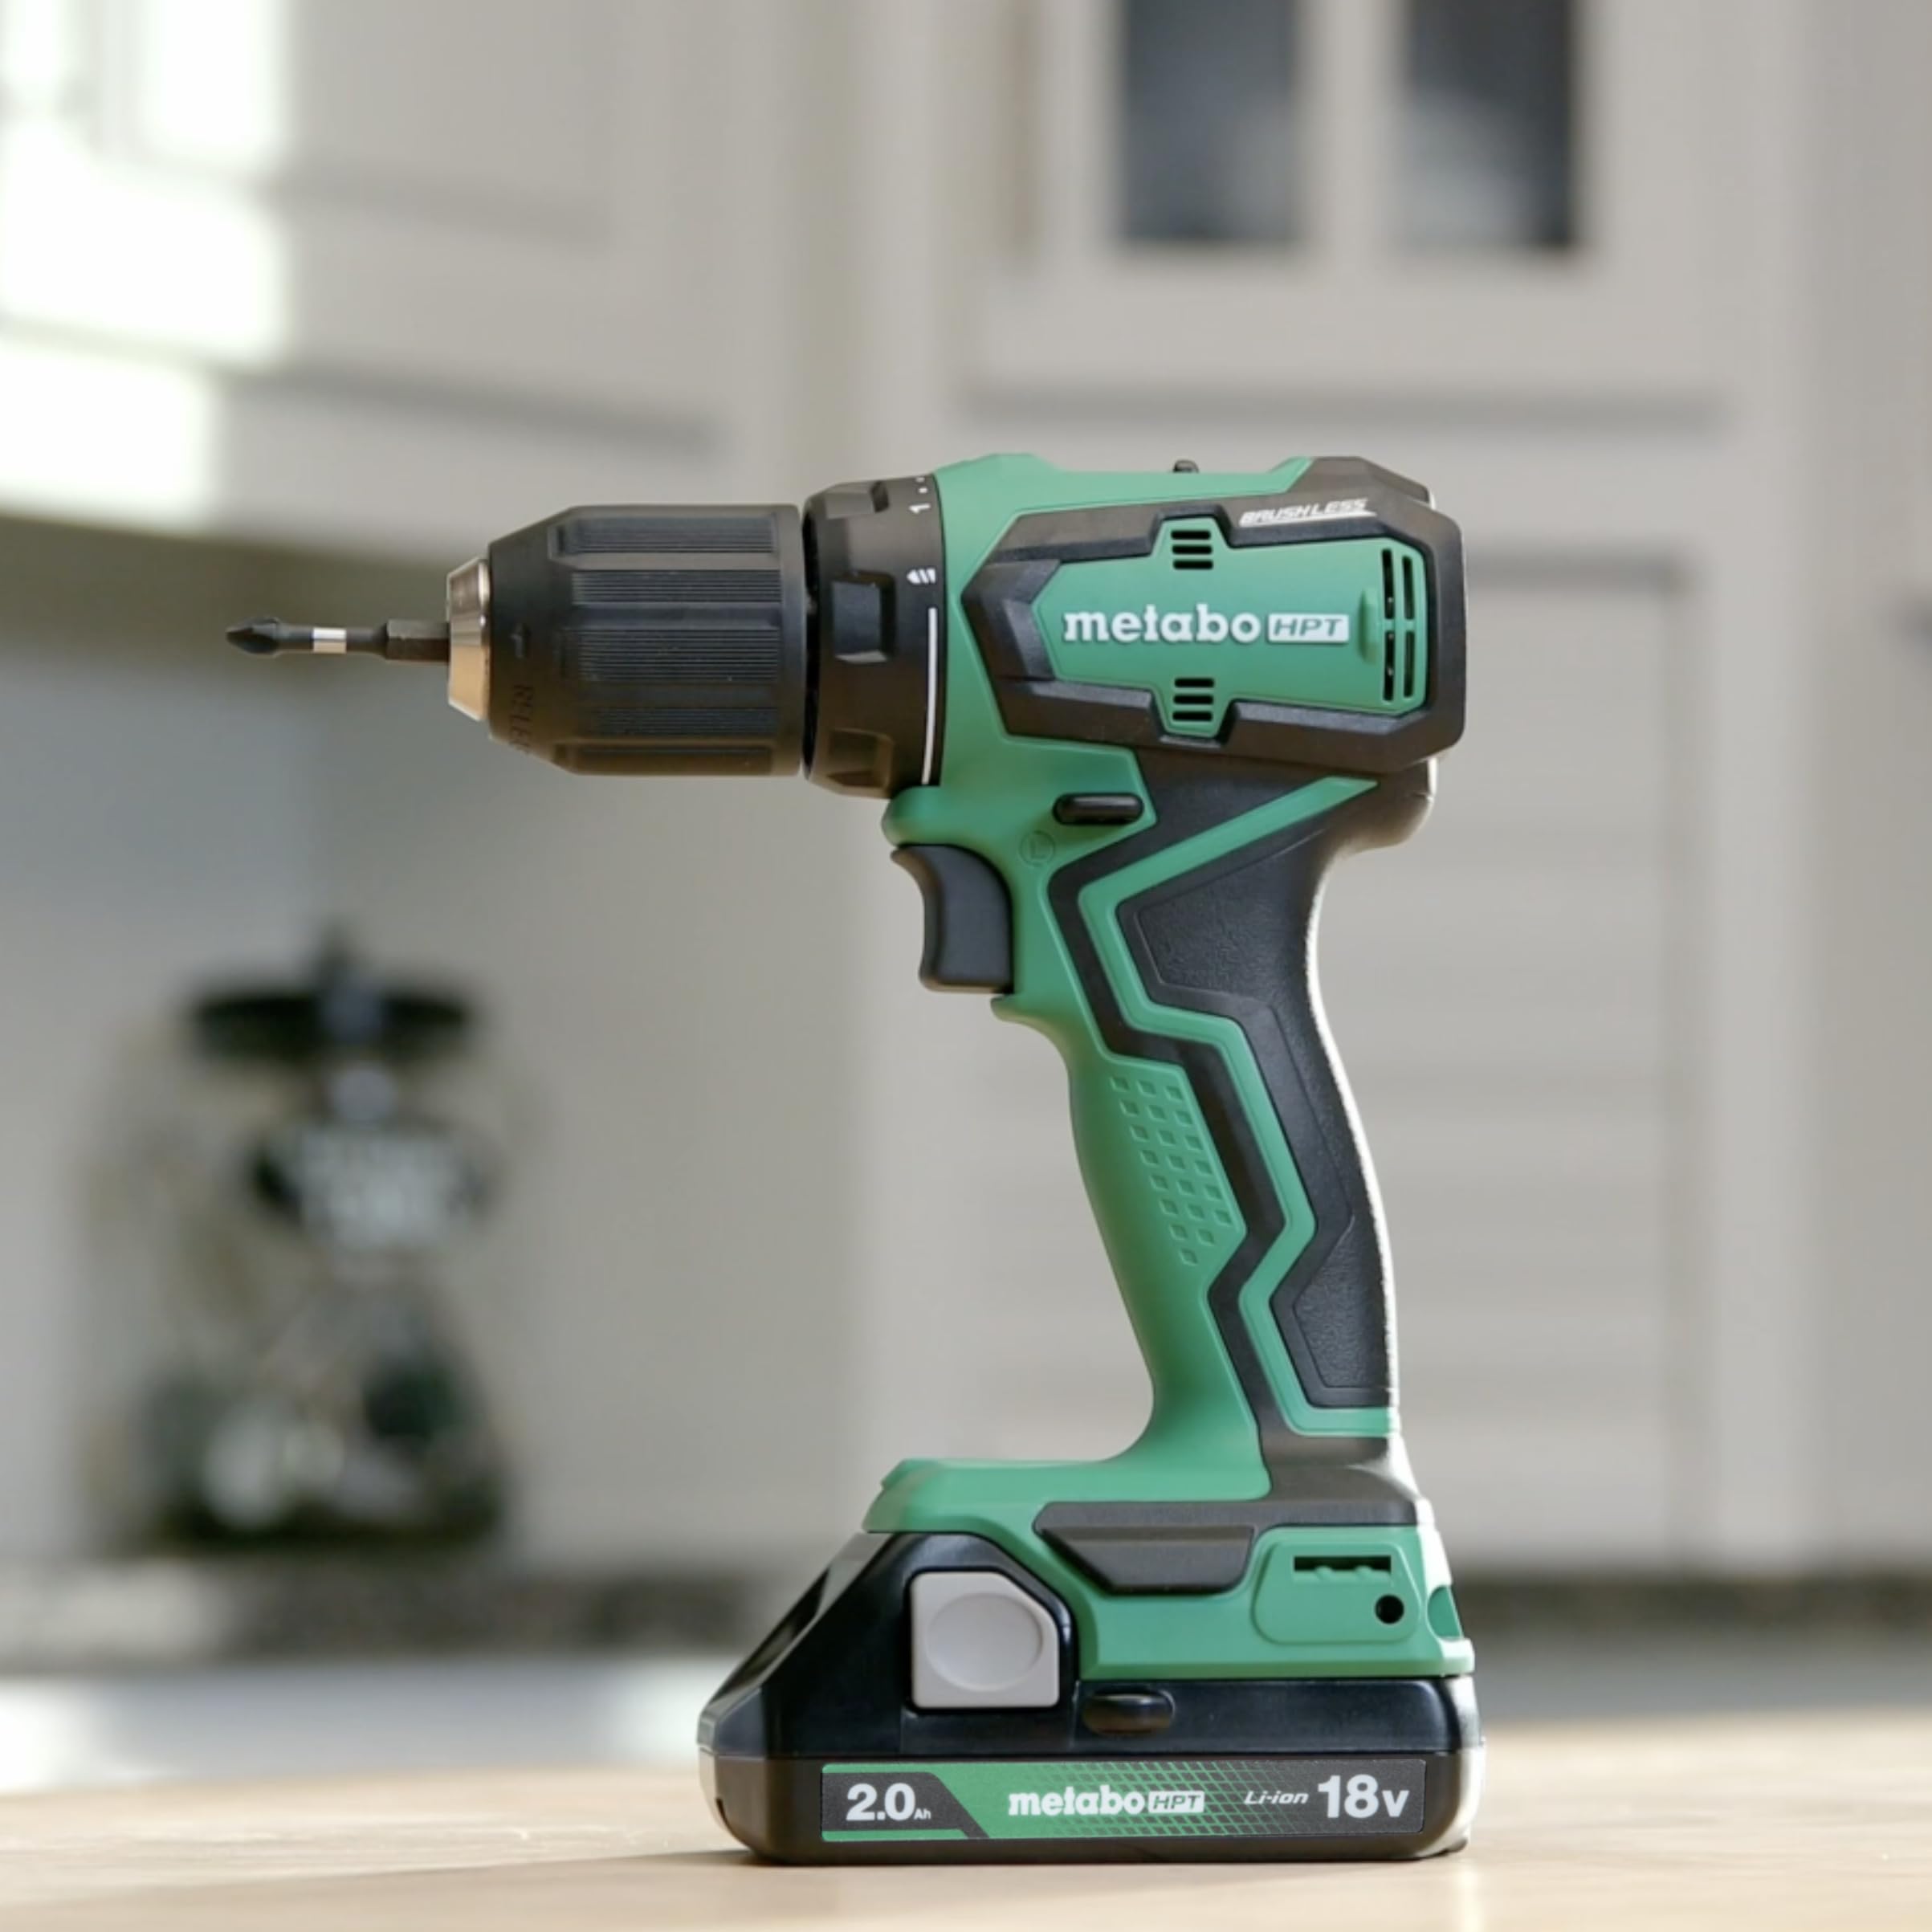 Metabo HPT 18V MultiVolt™ Cordless Sub-Compact Driver Drill Kit | Includes 2-18V, 2.0 Ah Batteries with Fuel Gauge | 485 in-lbs of Torque | Lifetime Tool Warranty | DS18DDXS